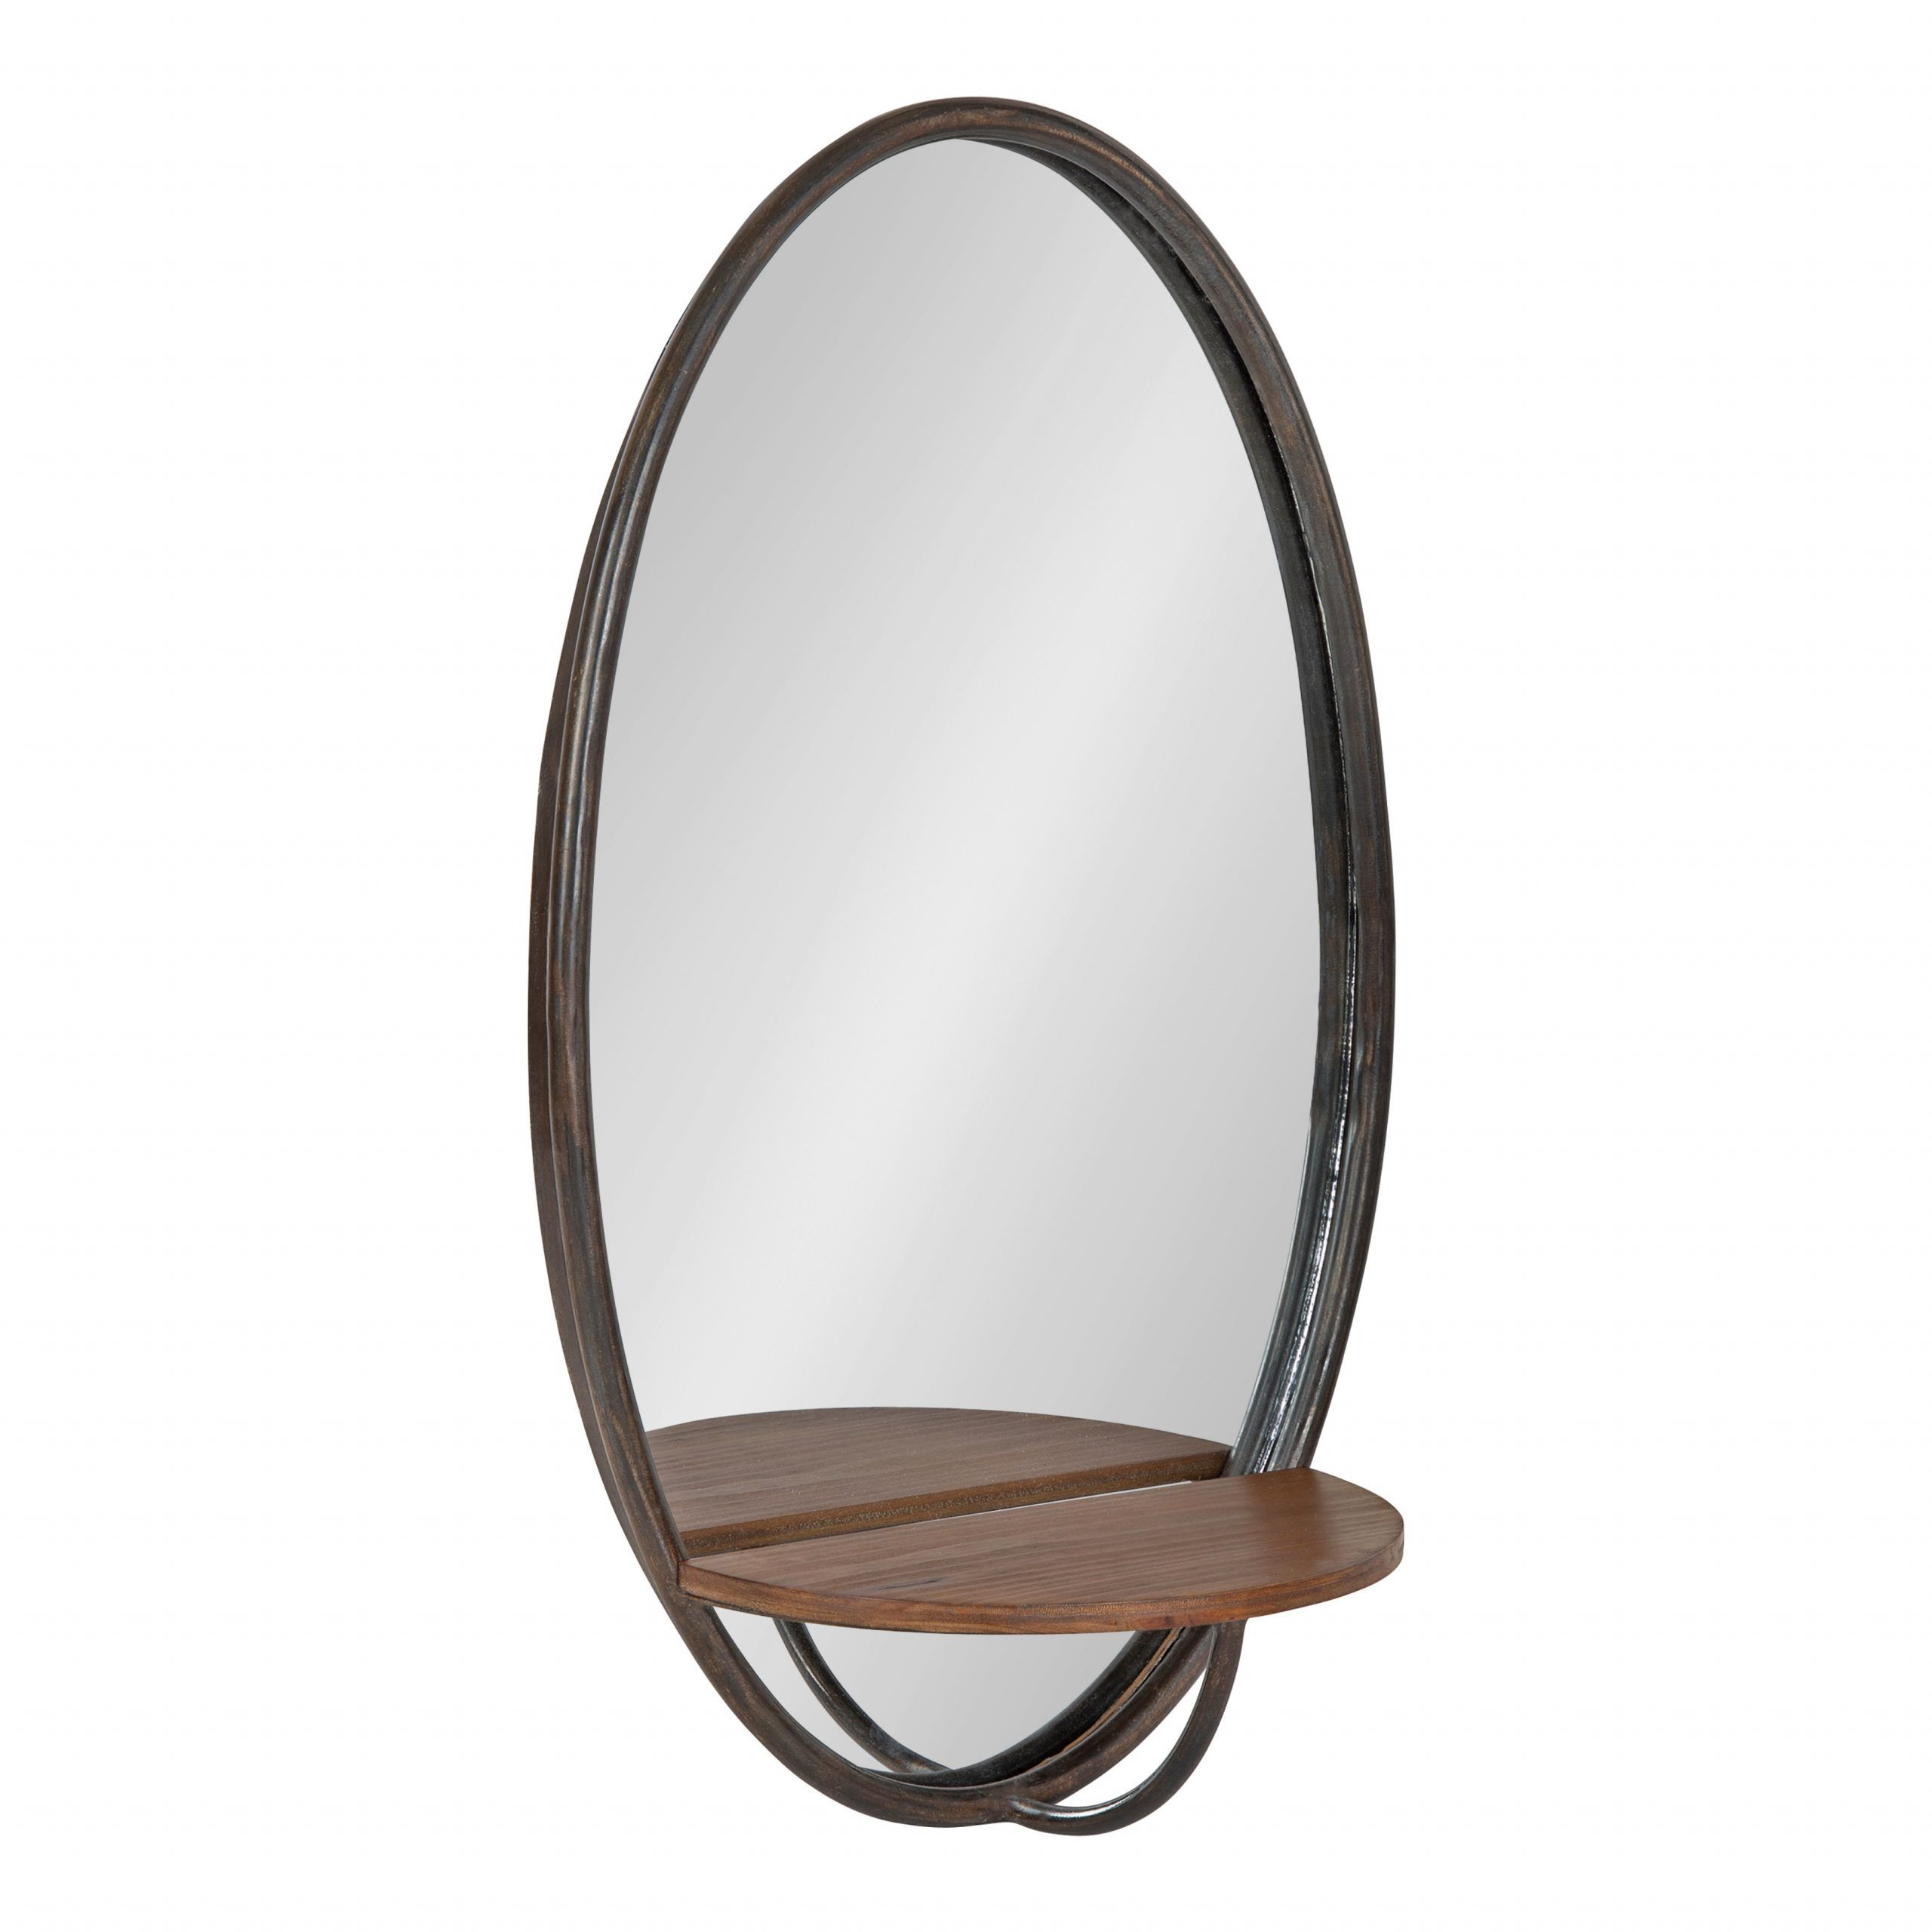 Kate And Laurel Gita Rustic Oval Wall Mirror With Shelf, 15" X 24 Inside Wooden Oval Wall Mirrors (View 7 of 15)